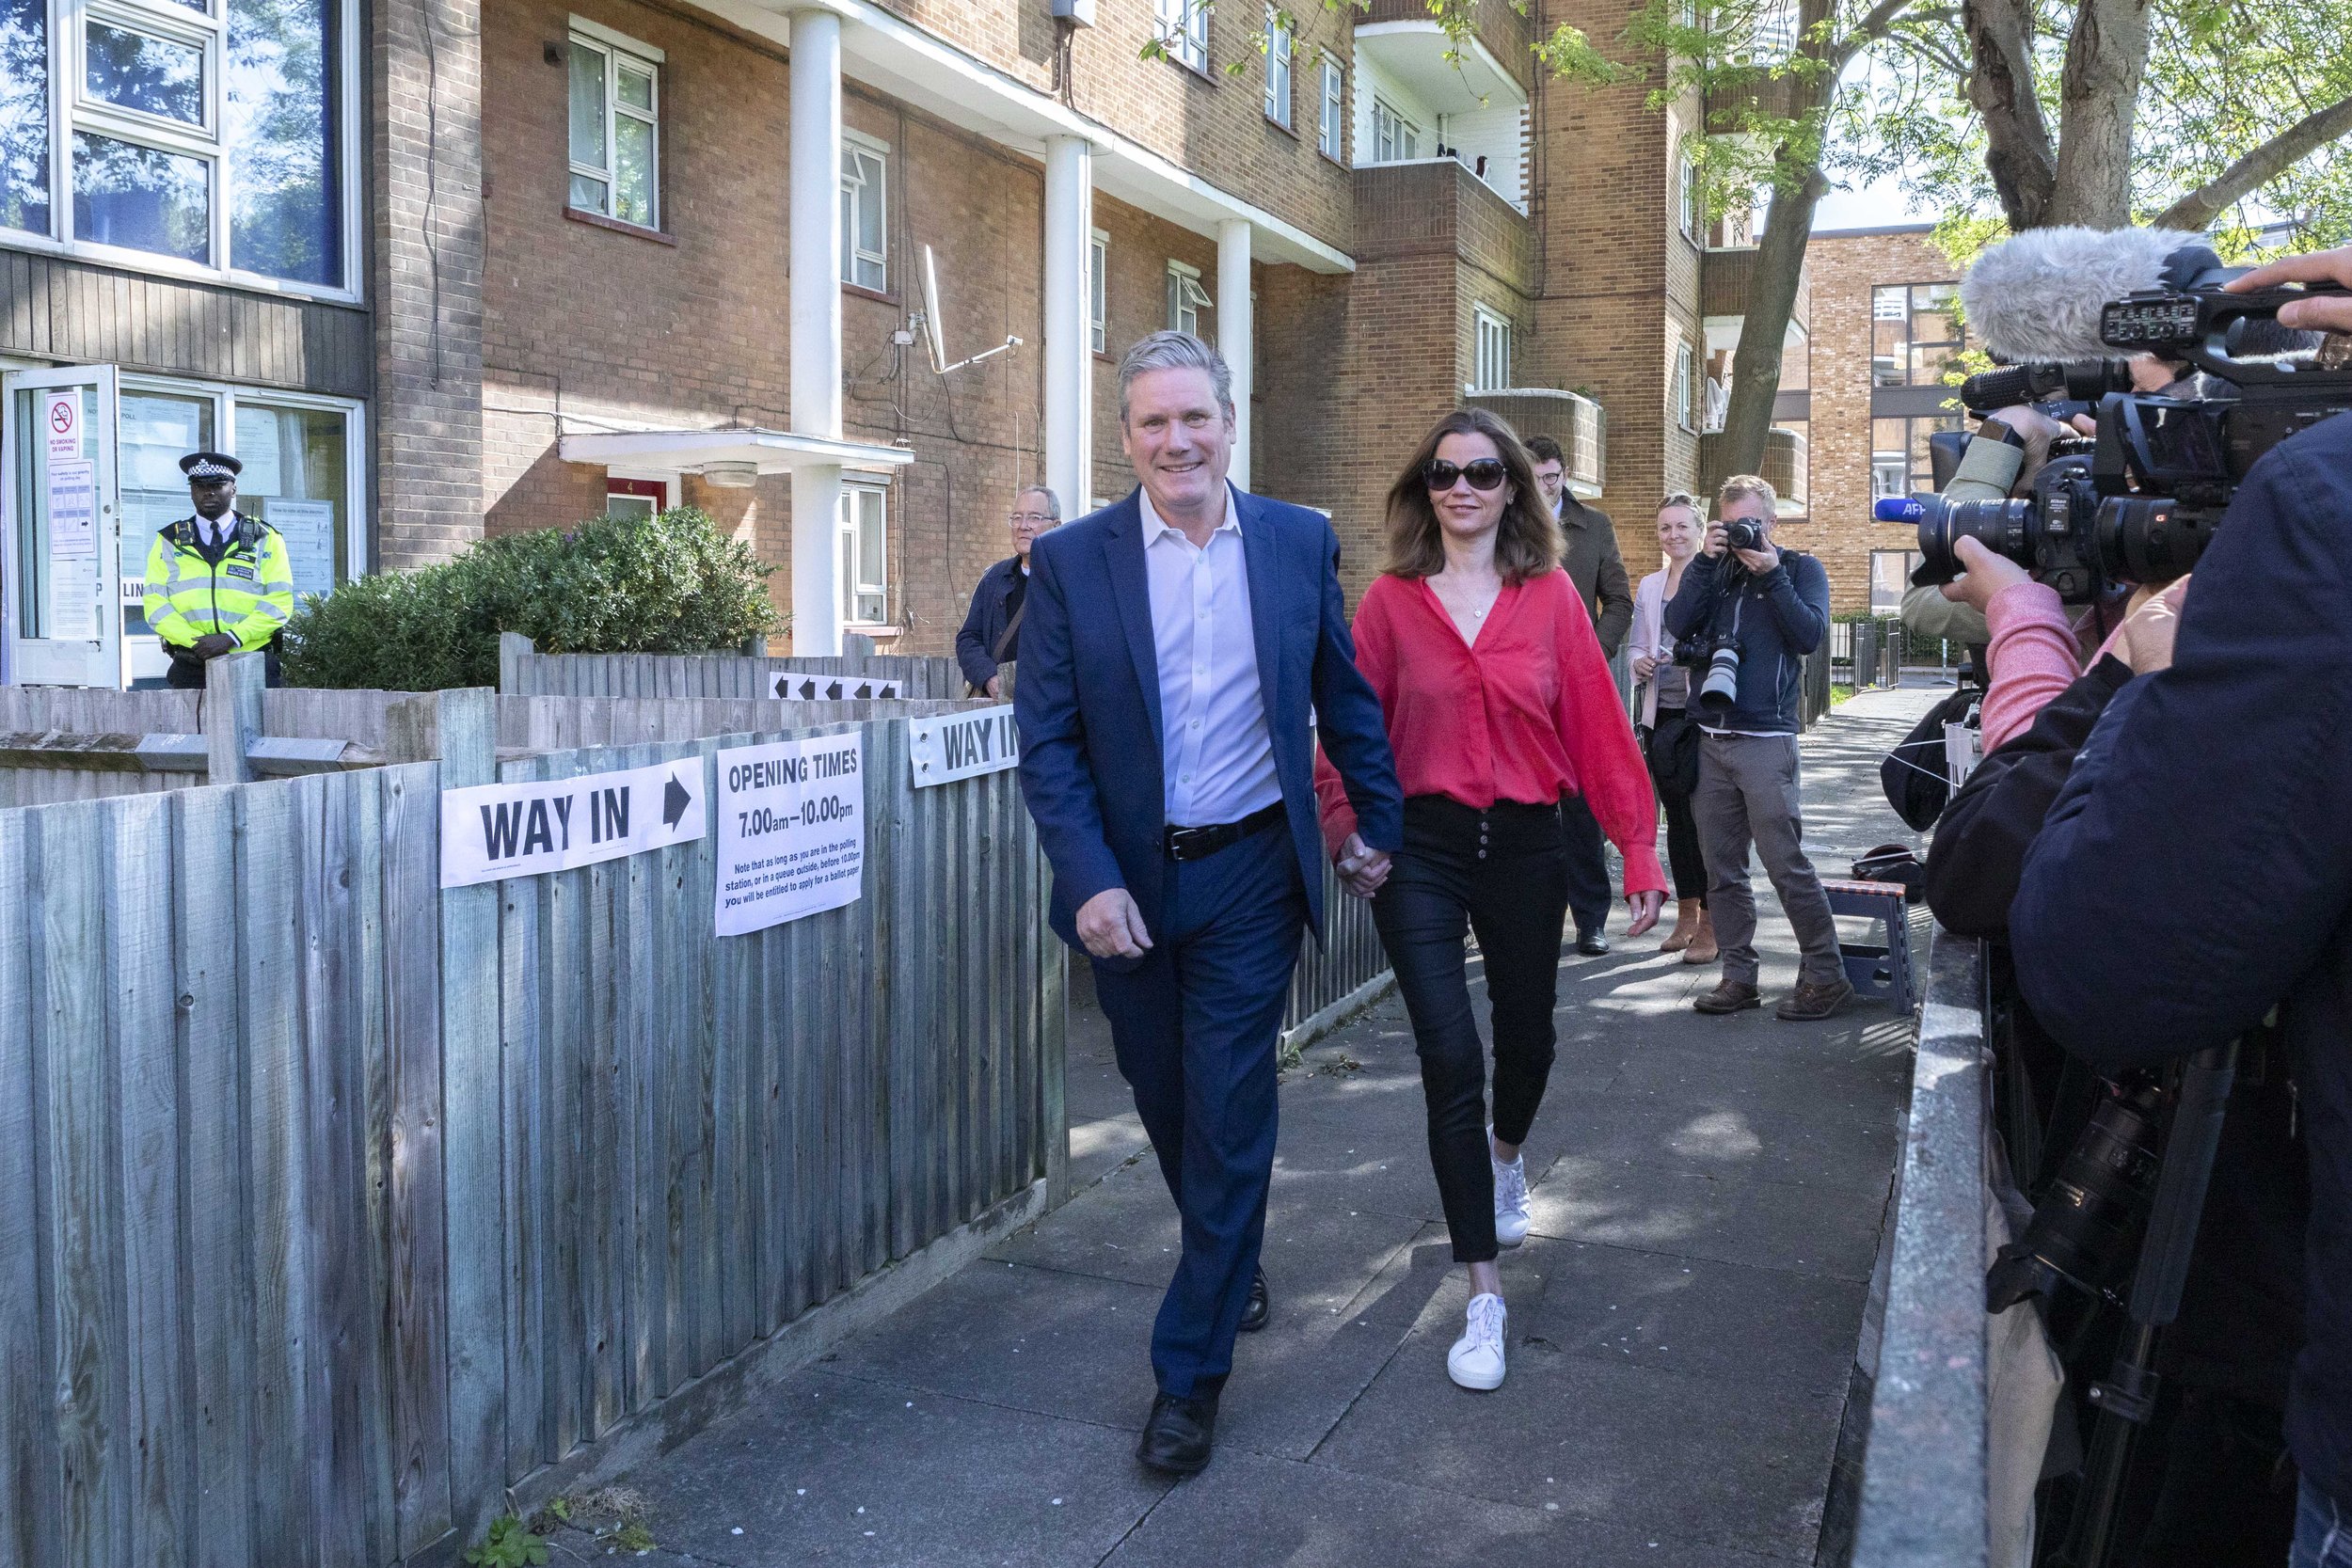  Labour Party leader Sir Keir Starmer (L) casts a vote at the local elections in North London with wife Victoria (R) - May 2022.  